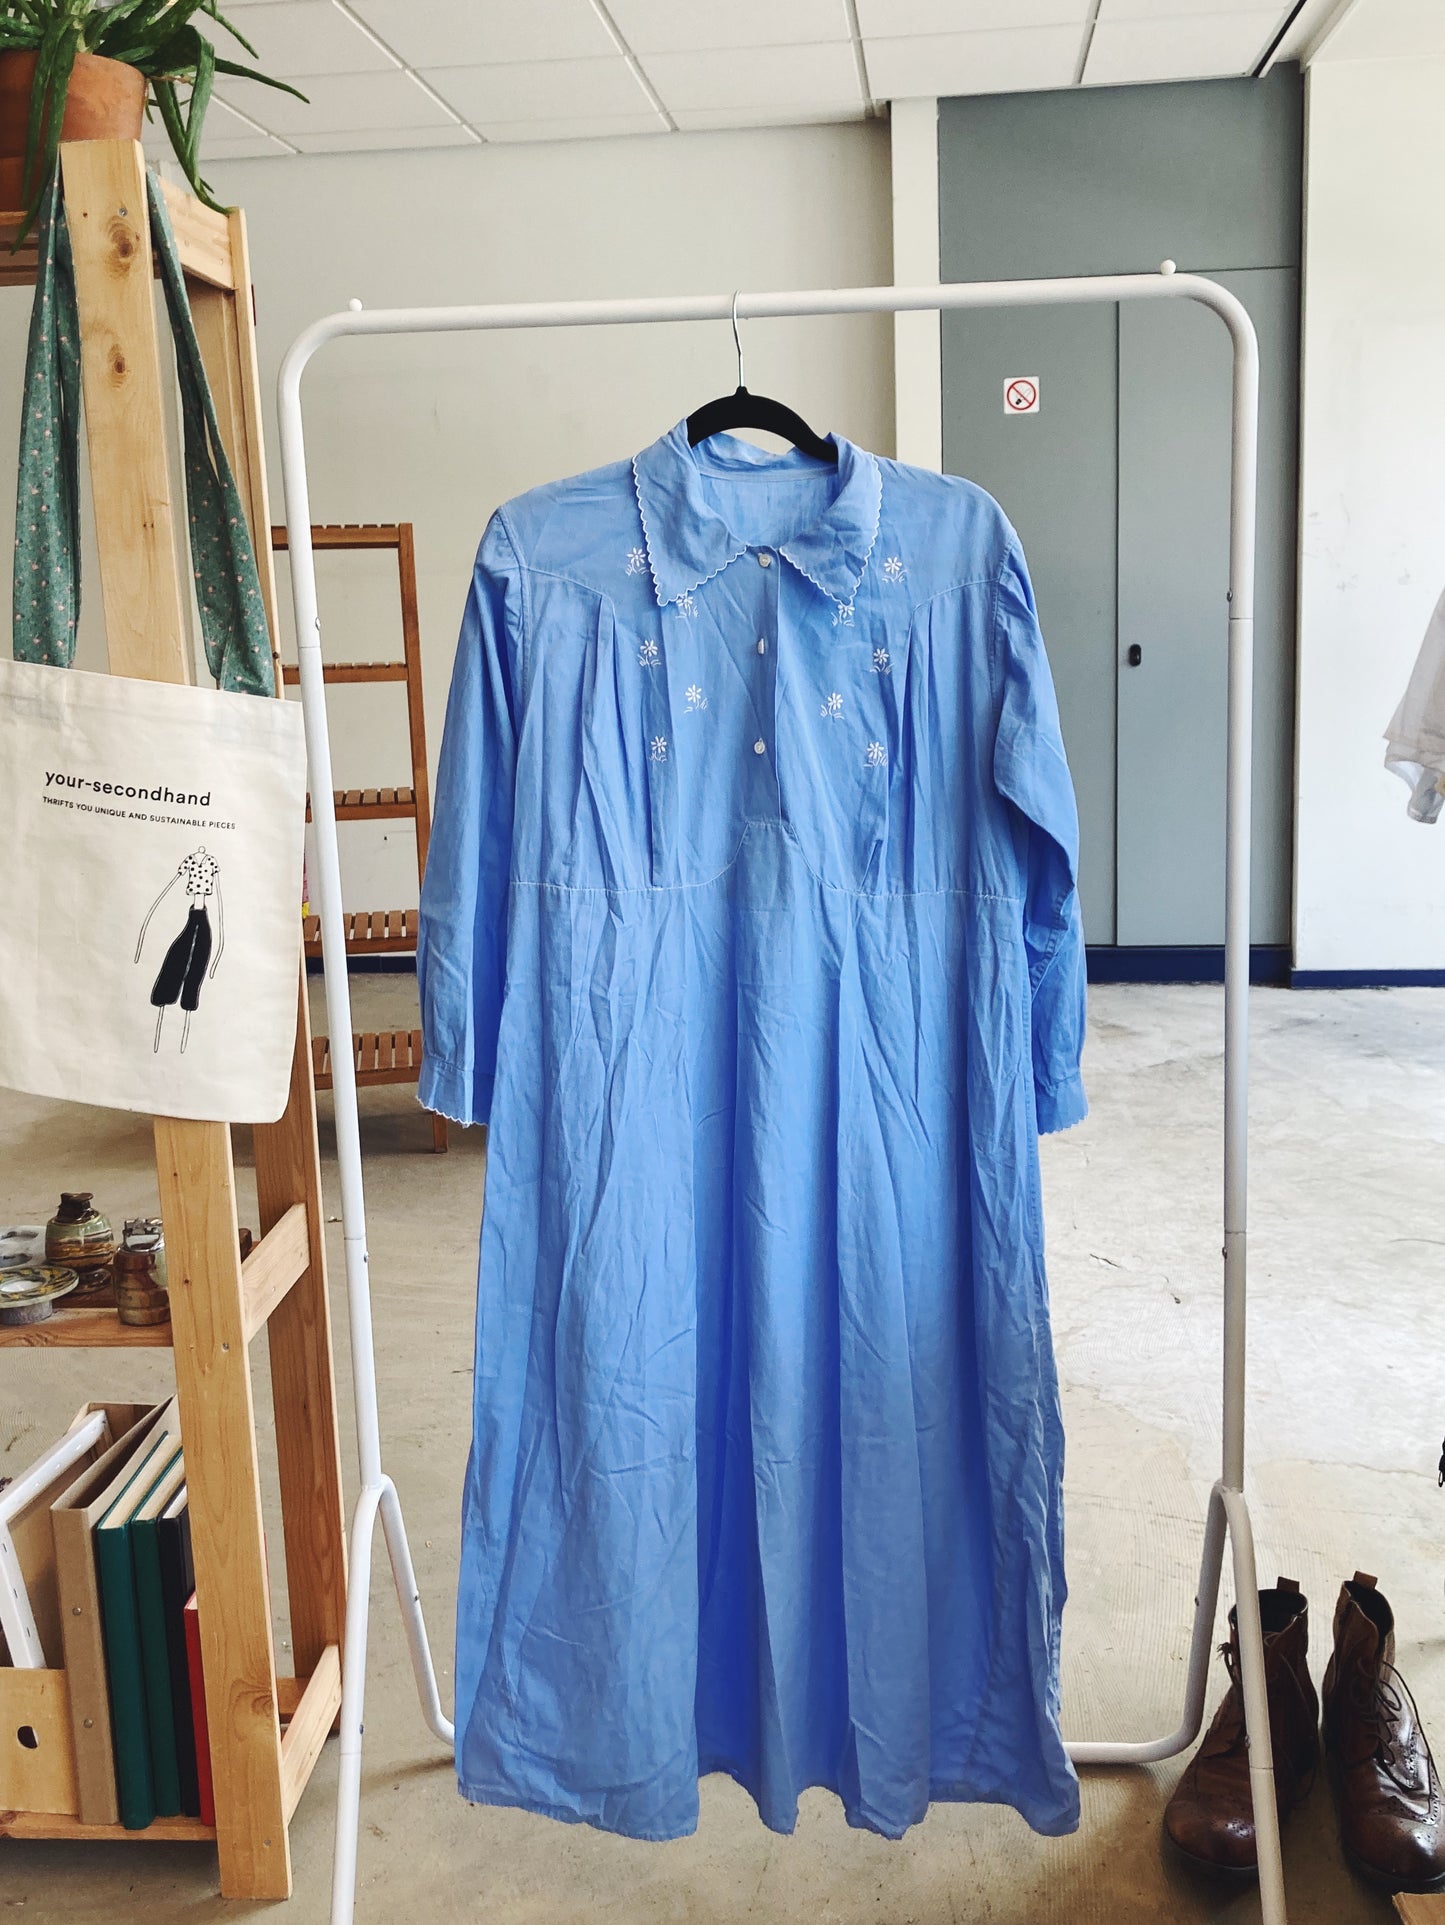 NEW IN! Blue nightgown